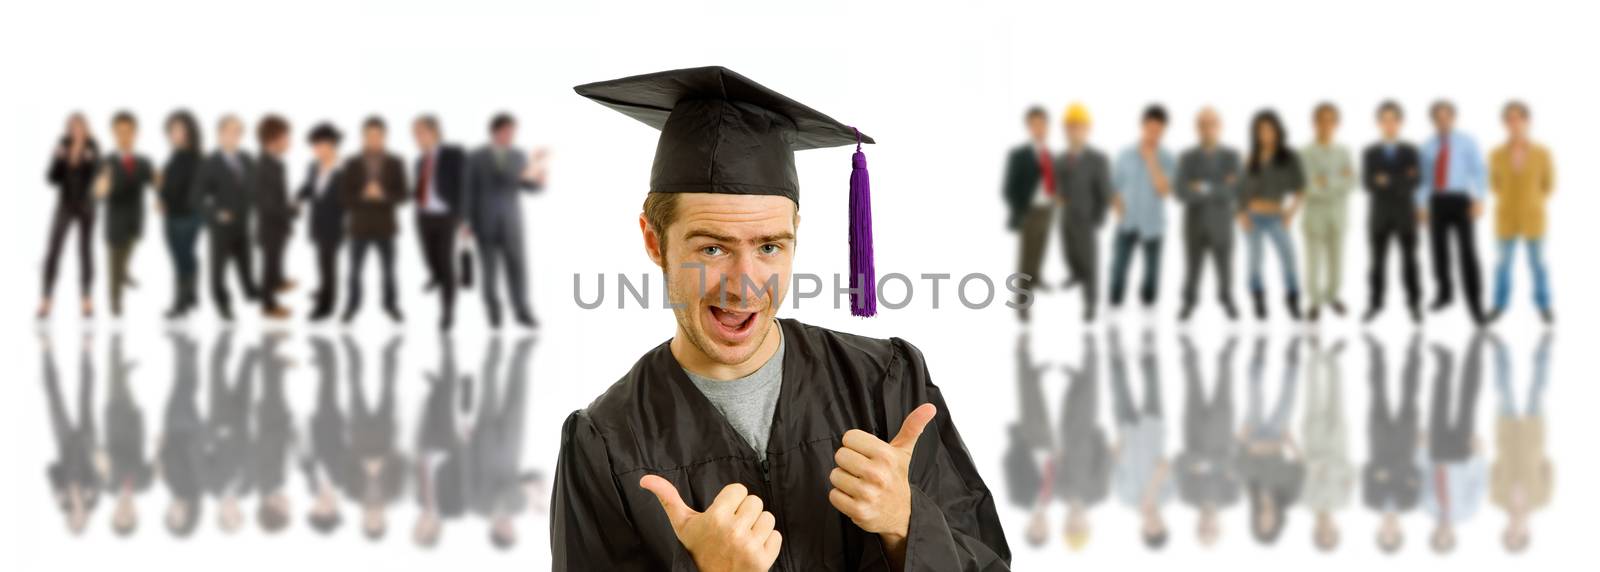 young man after his graduation, in front of a group of people